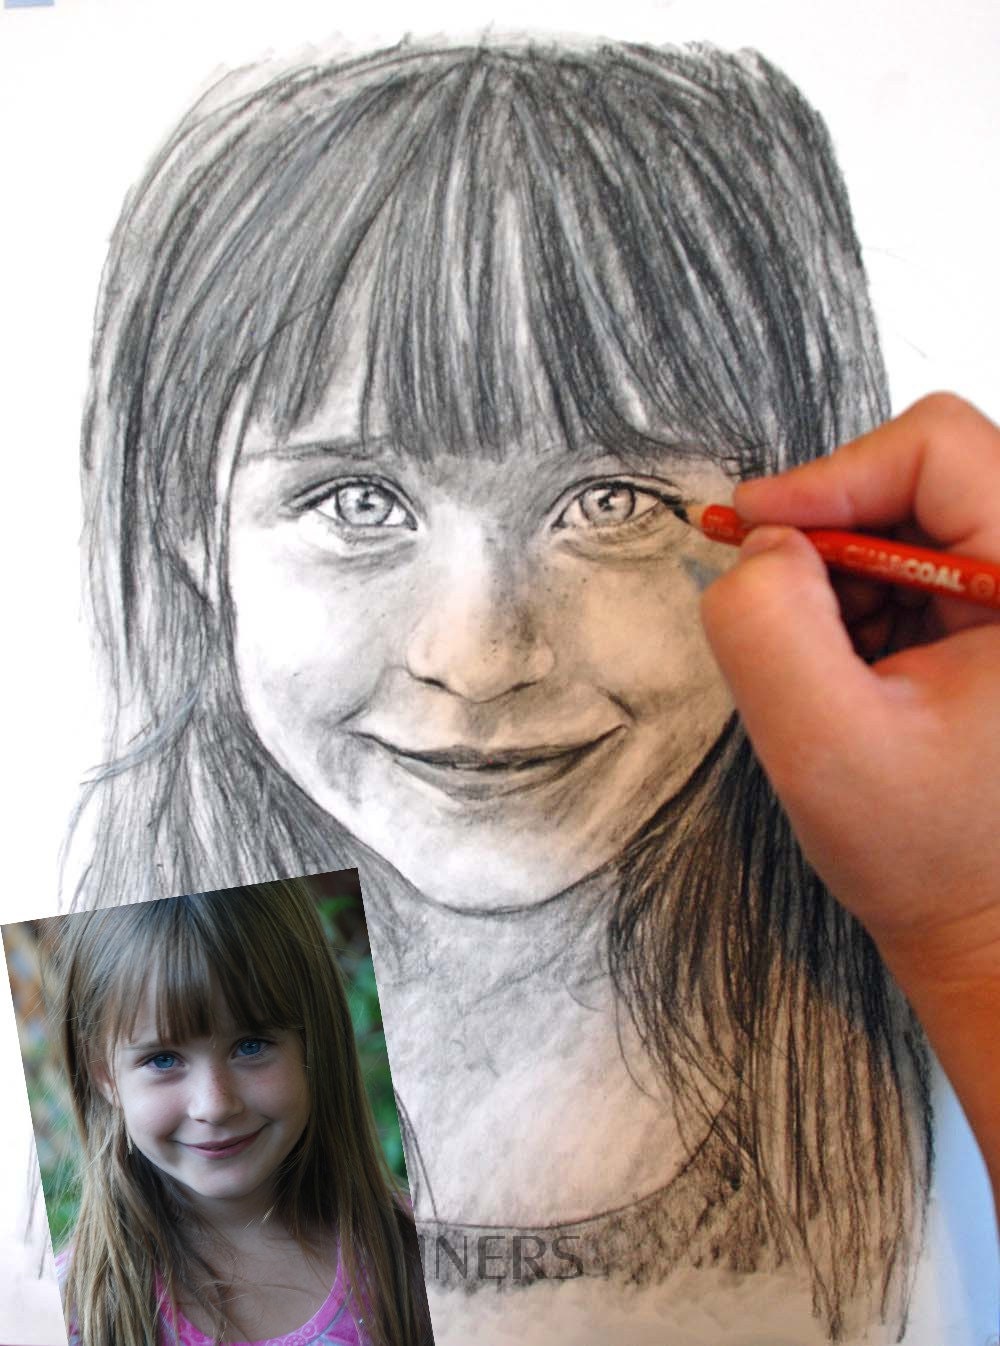 Custom Child Portrait Drawn in Charcoal Commissioned from Photos